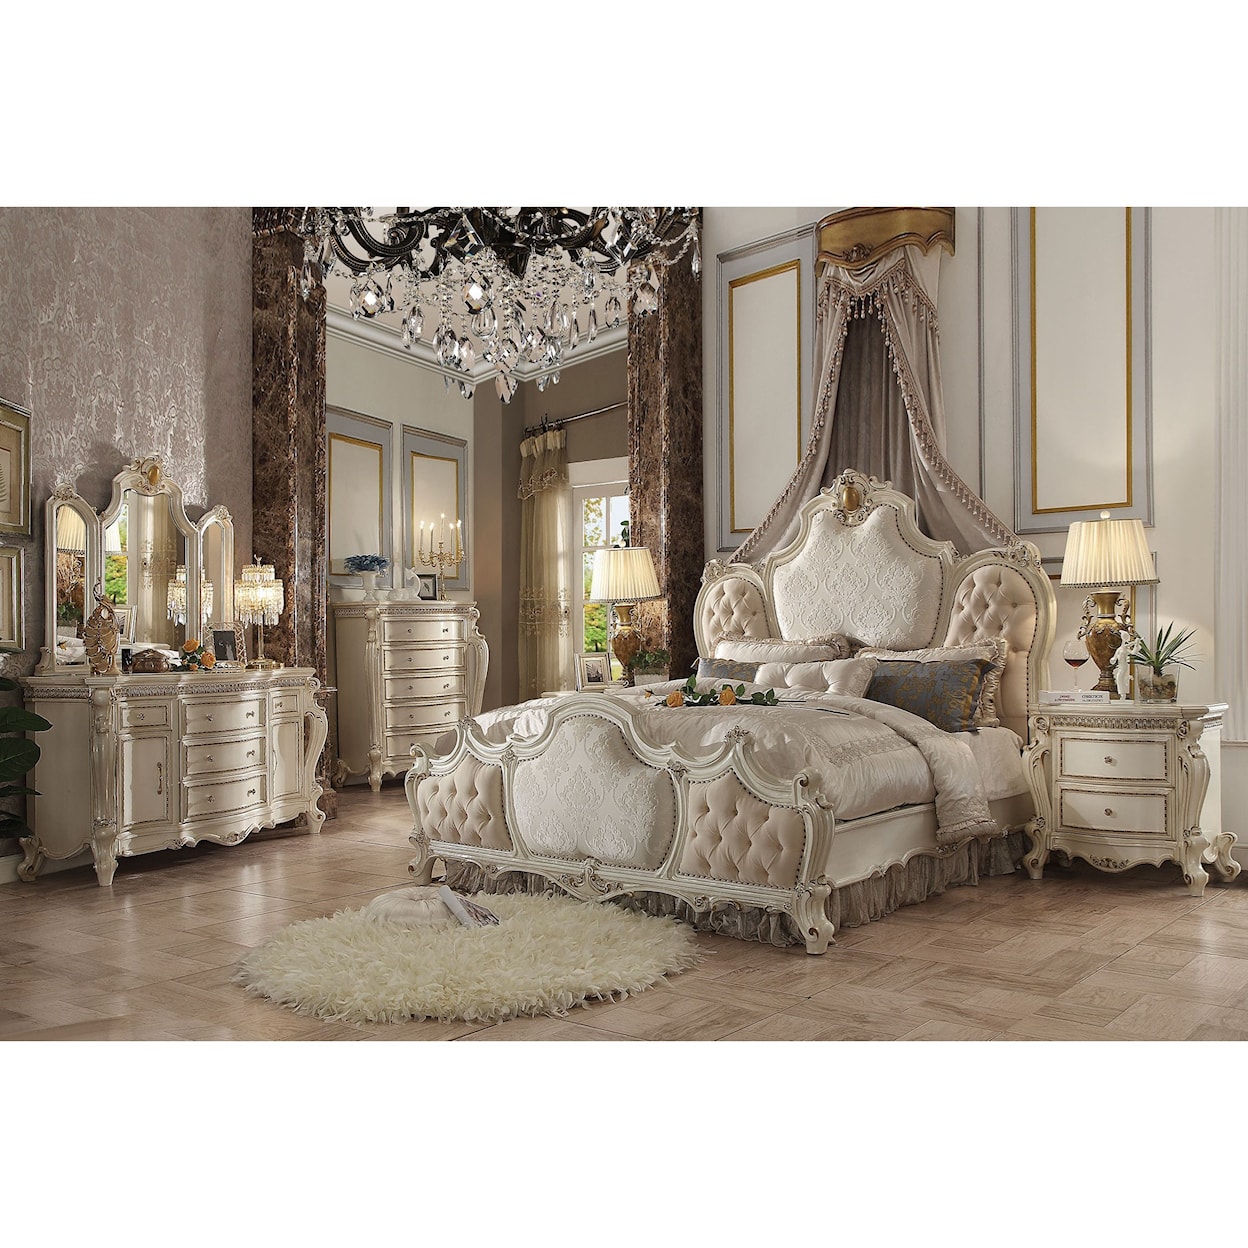 Acme Furniture Picardy King Bedroom Group